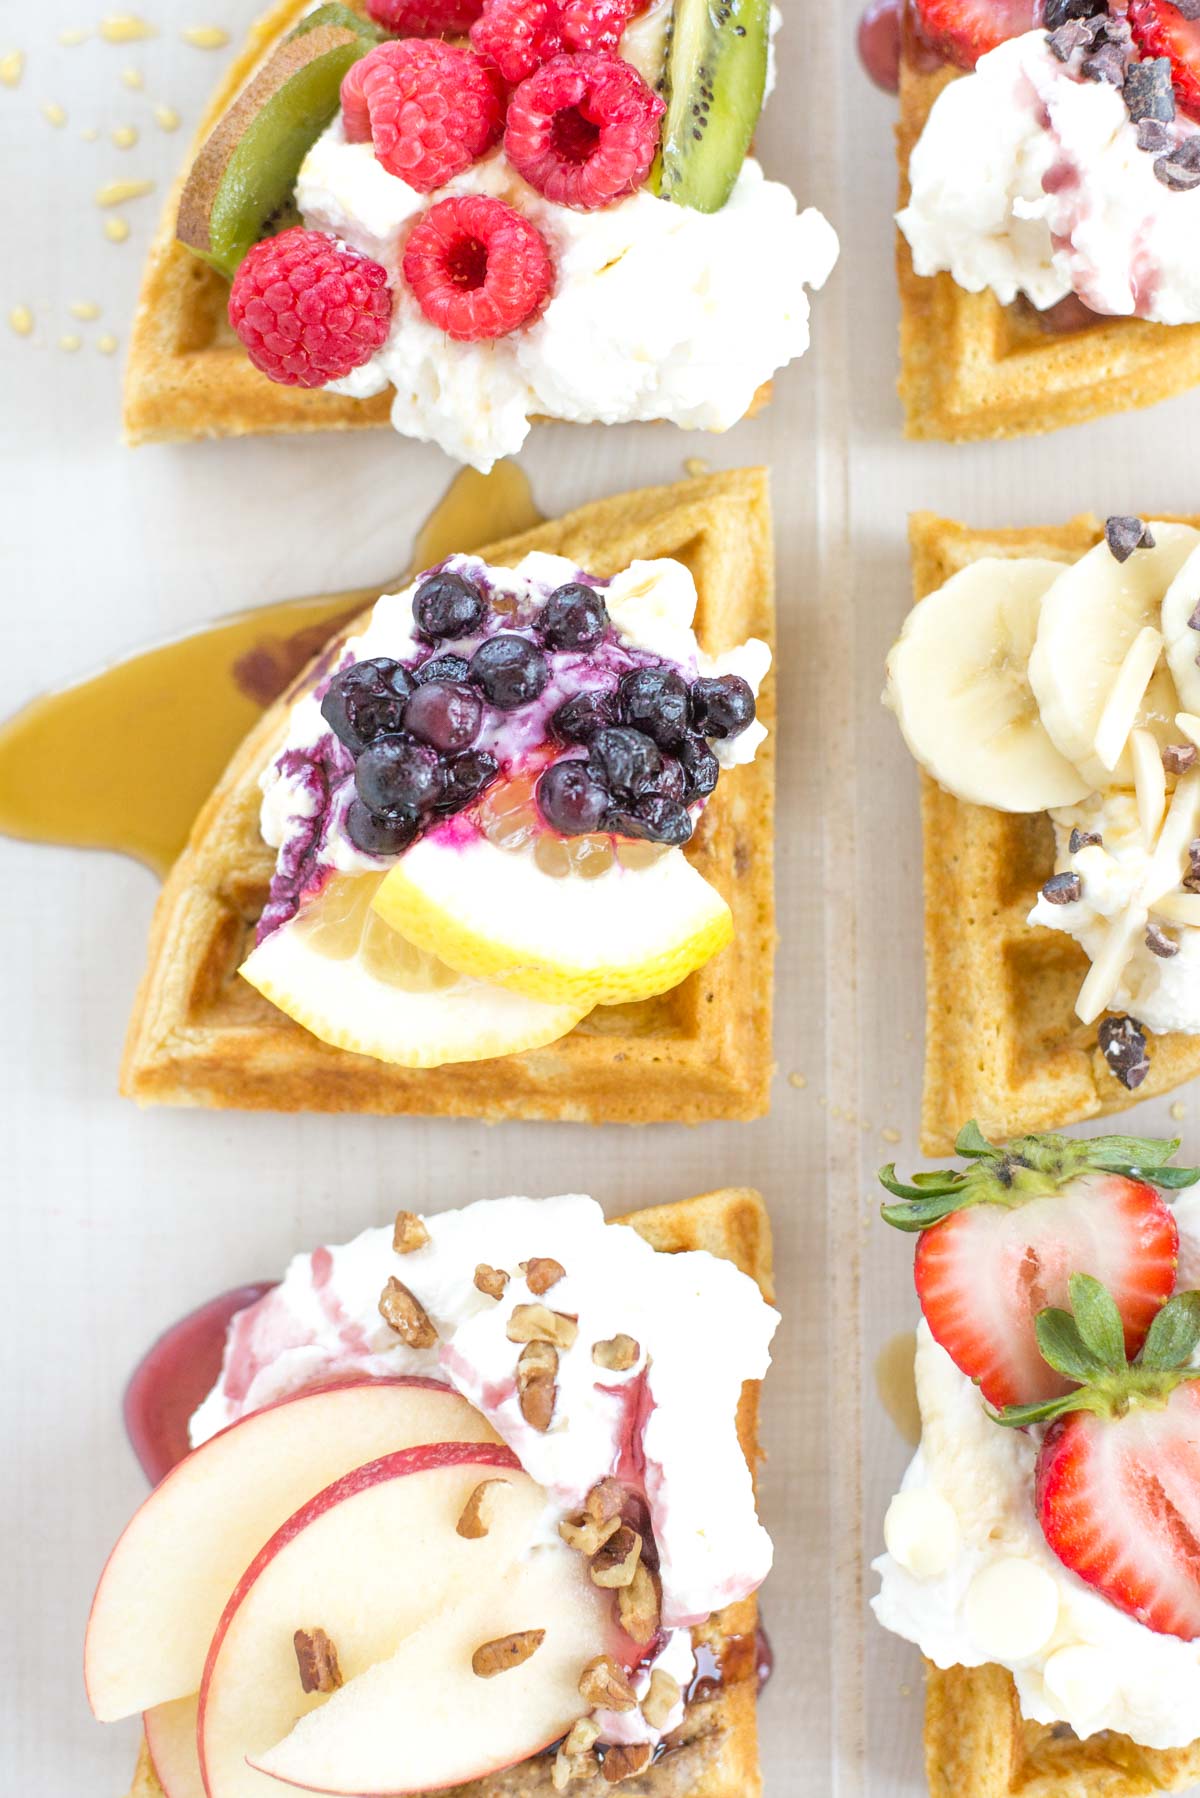 The fastest gluten-free waffles you'll ever make. Five minutes and six pantry staples and breakfast awaits.